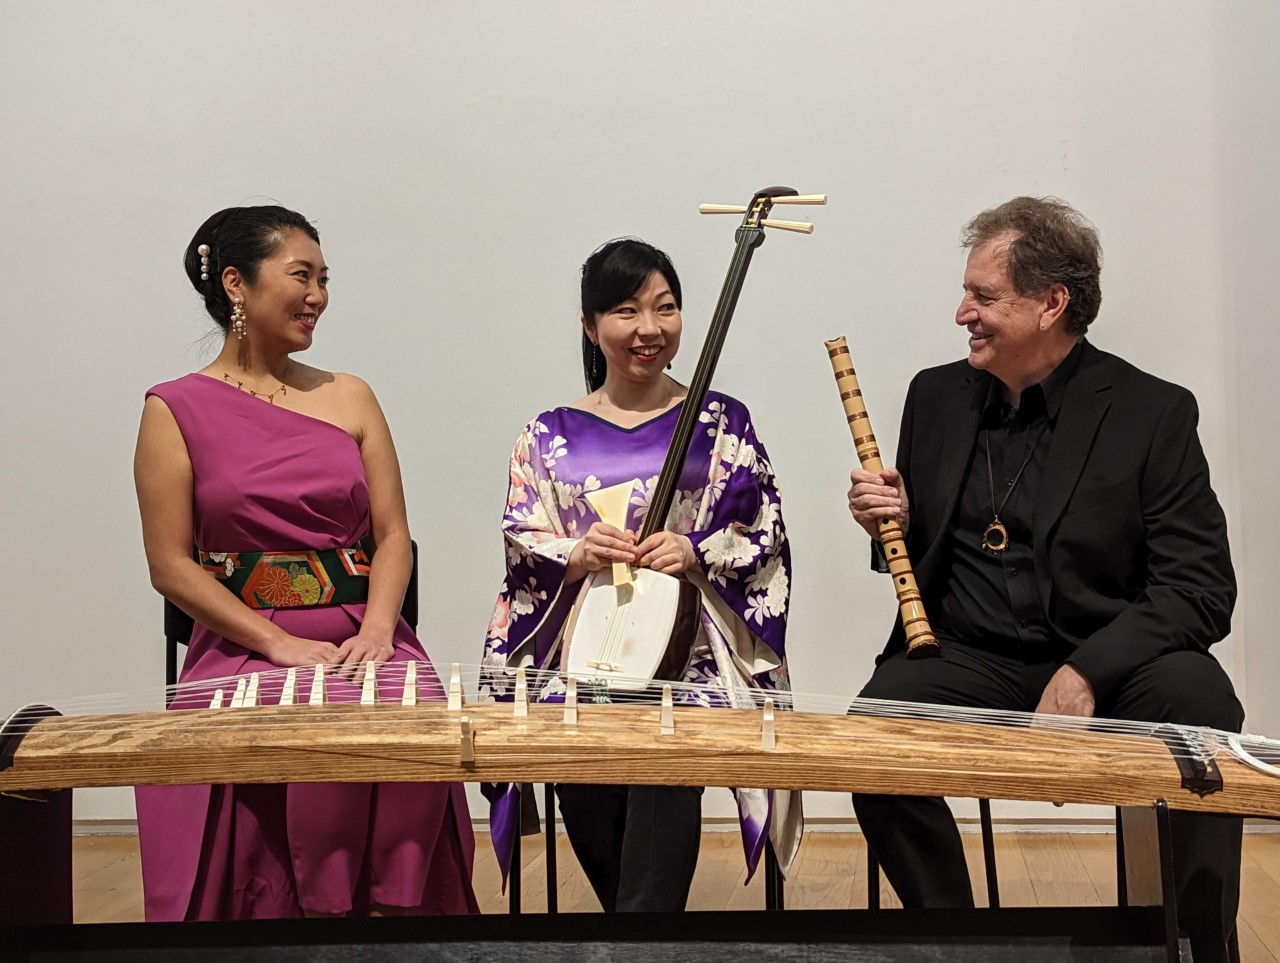 Kyo-Shin-An Arts and Arianna String Quartet - East Central College